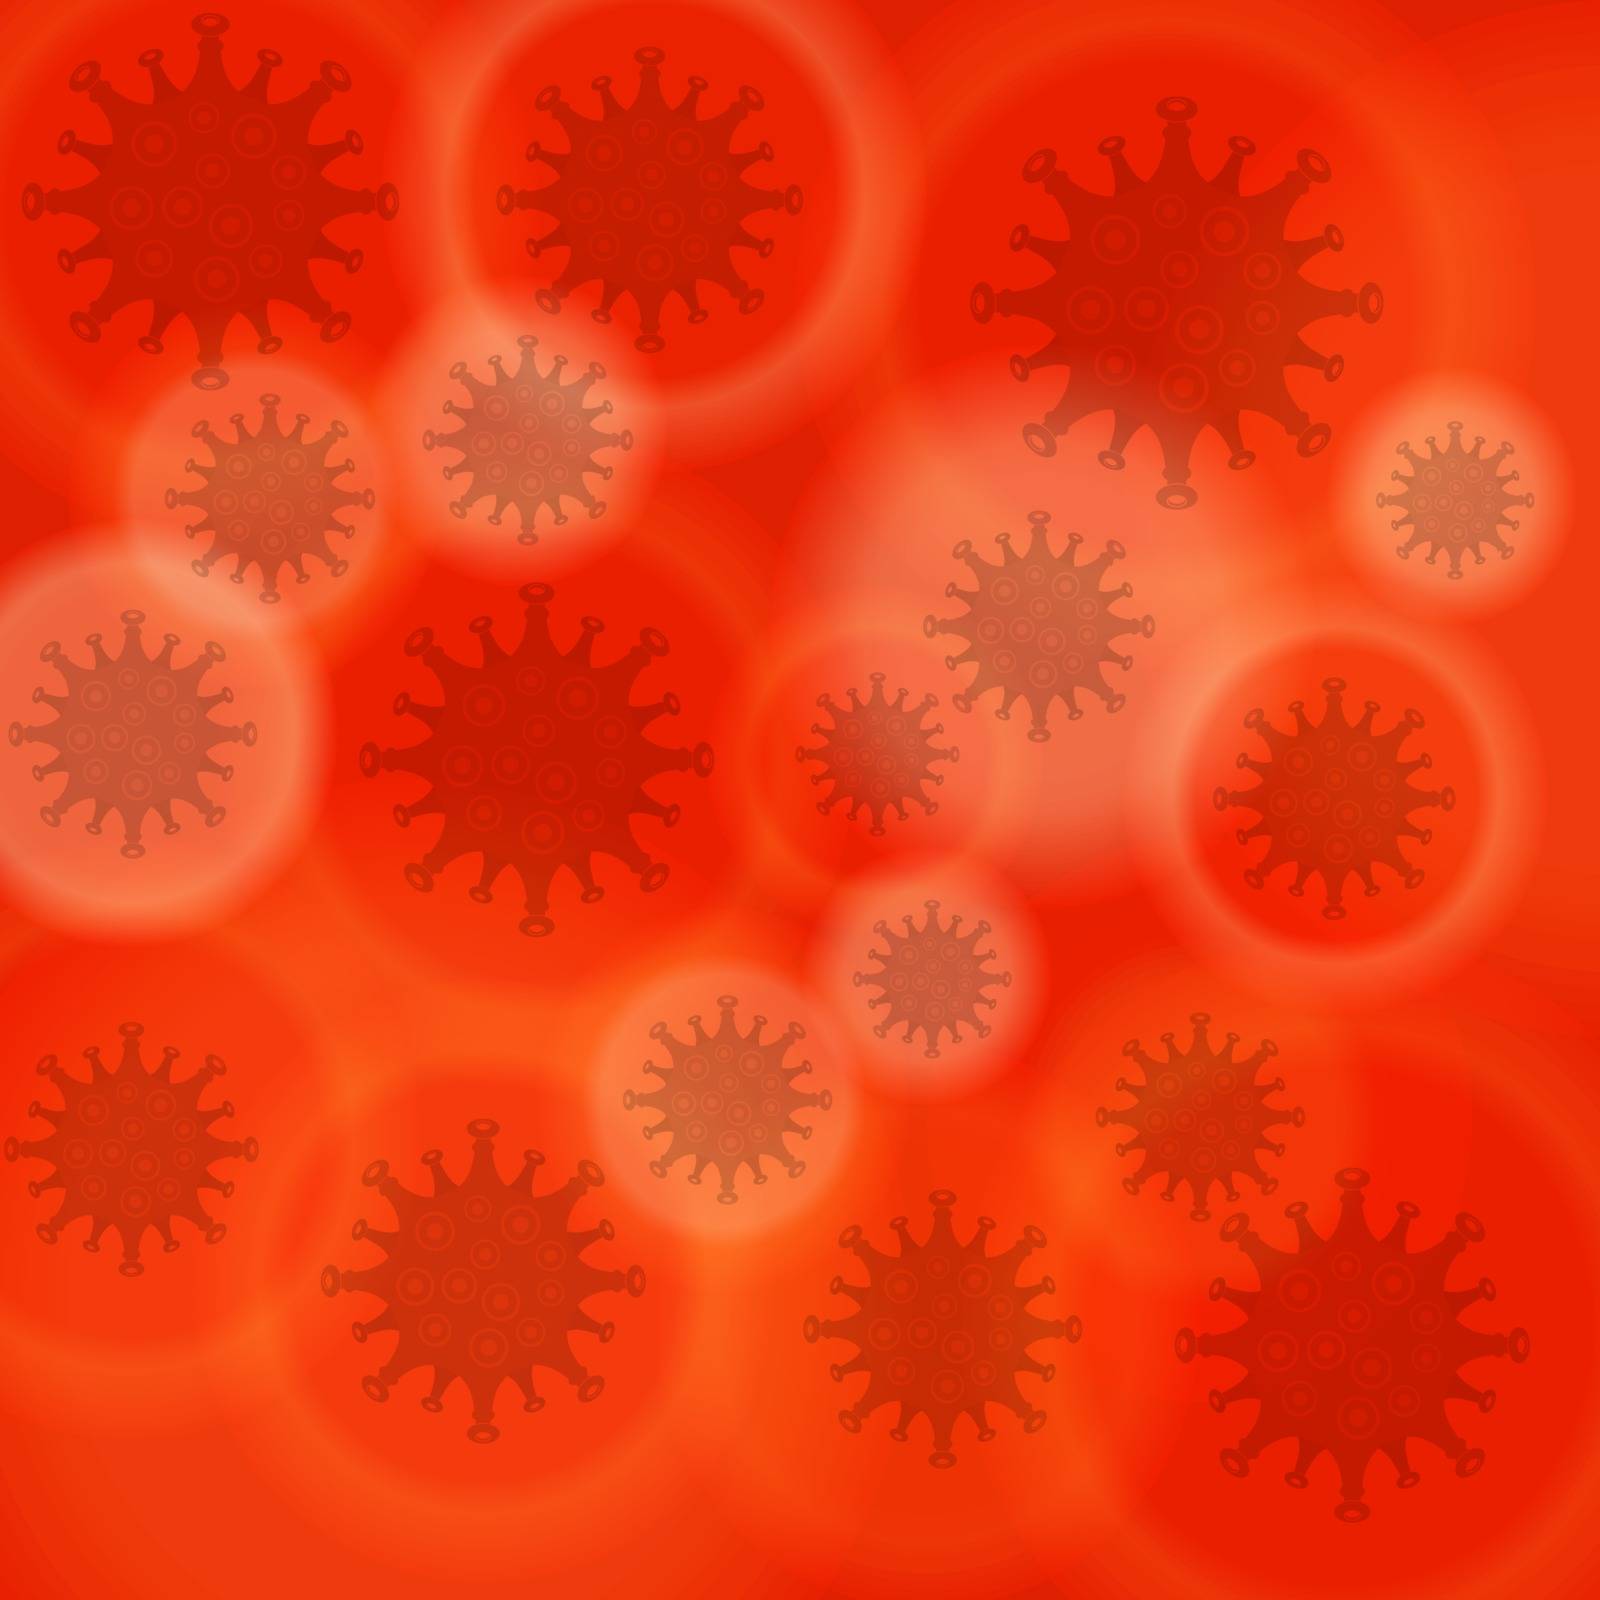 Stop Pandemic Novel Coronavirus Sign on Red Blurred Background. COVID-19 by valeo5